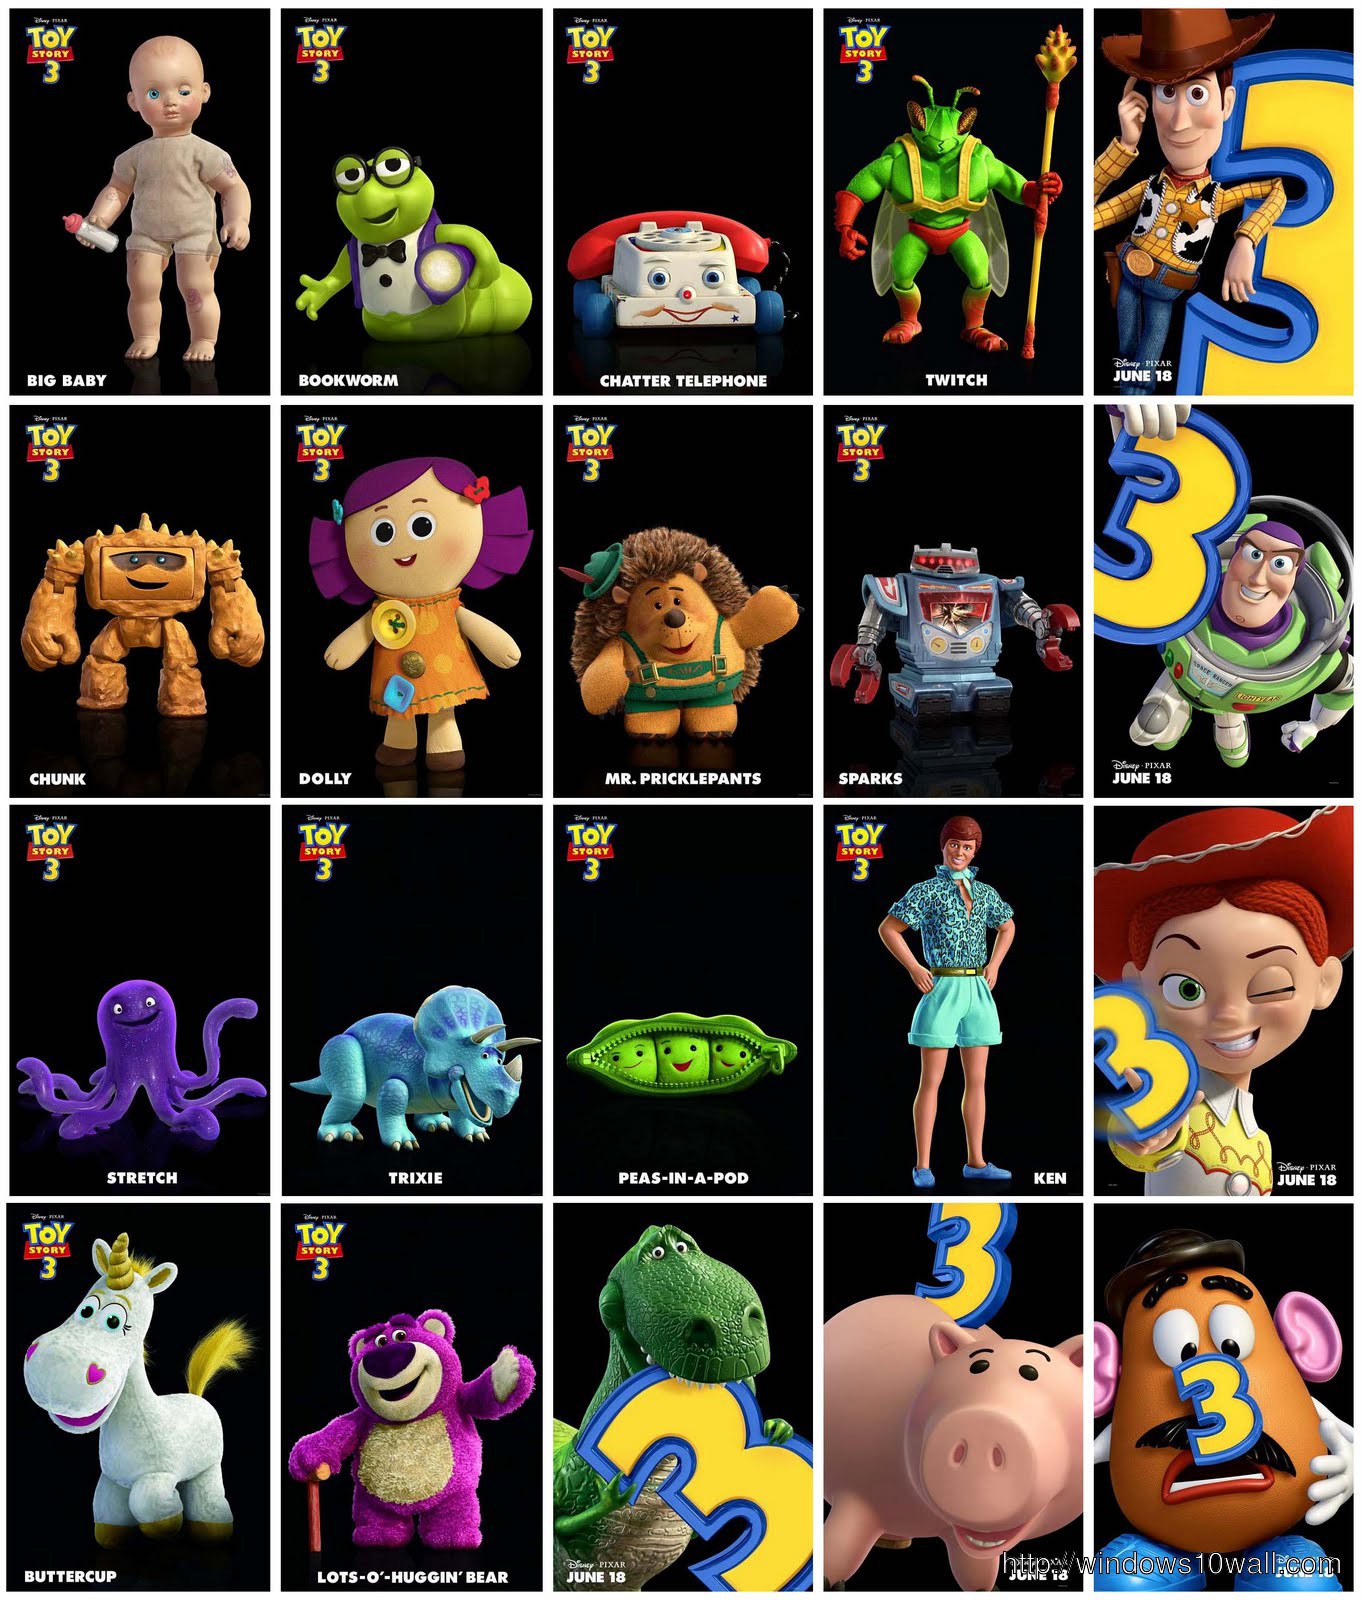 Toy story characters Image